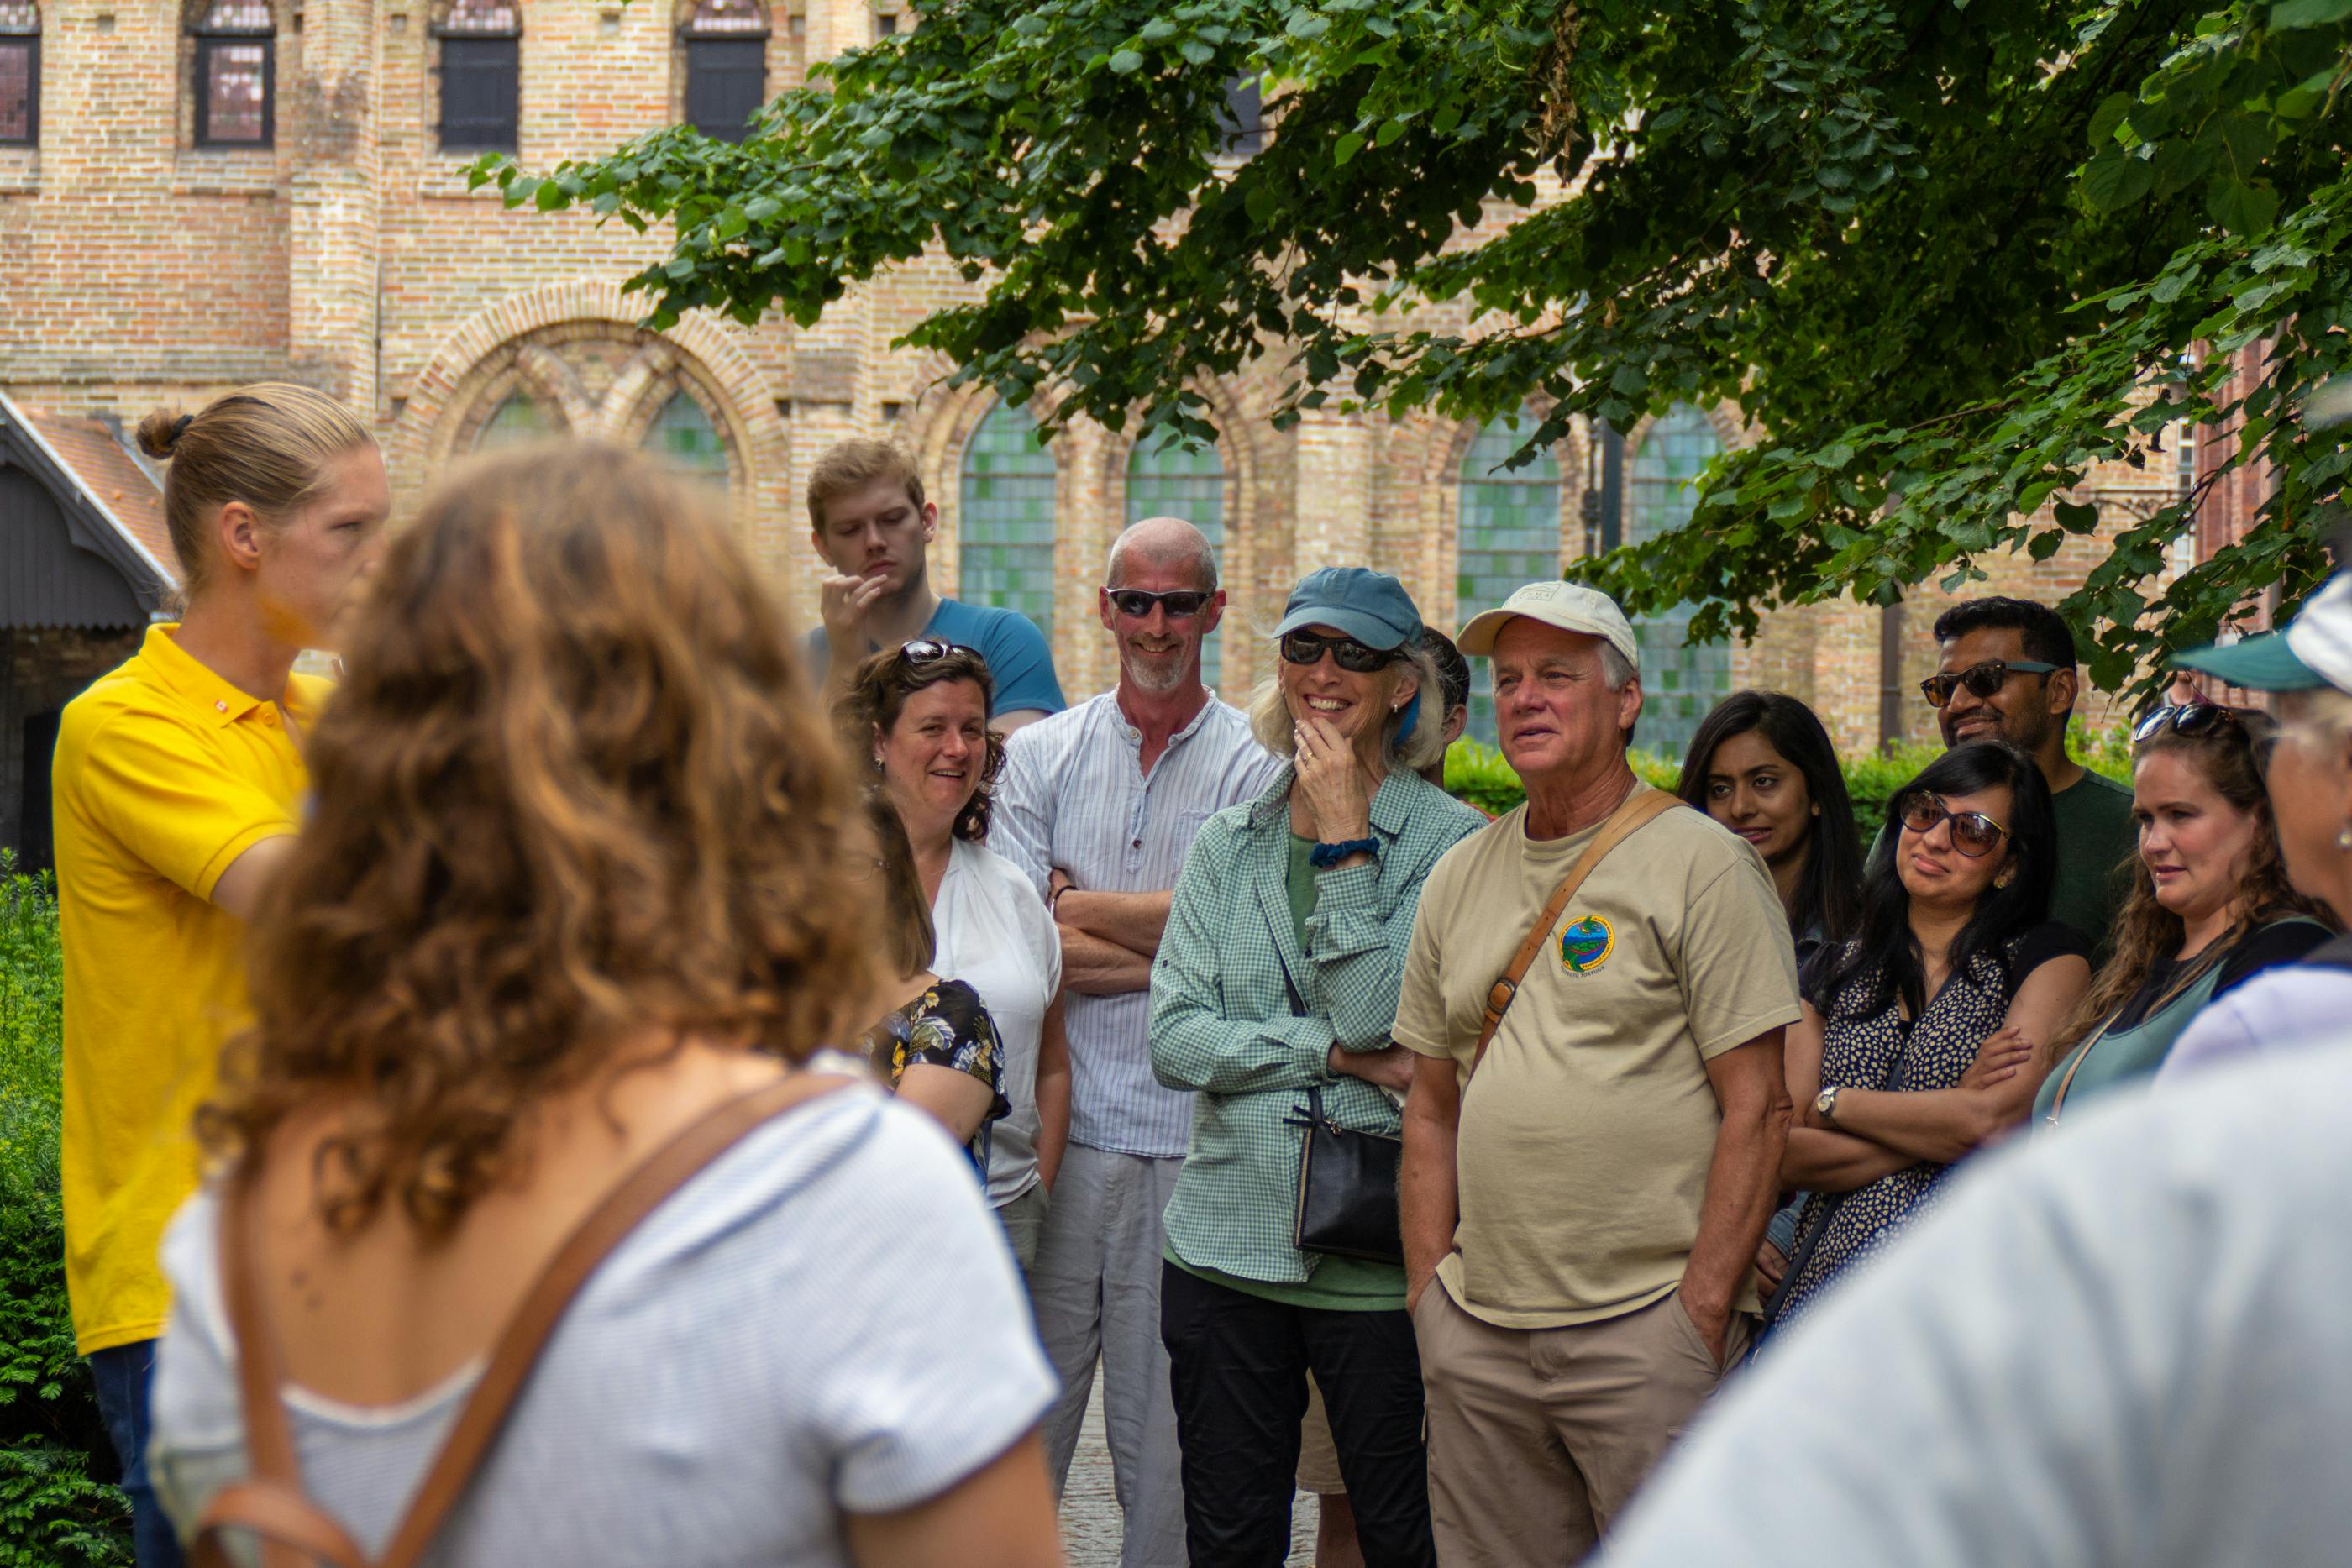 Free History & heritage guided walking tour of Bruges